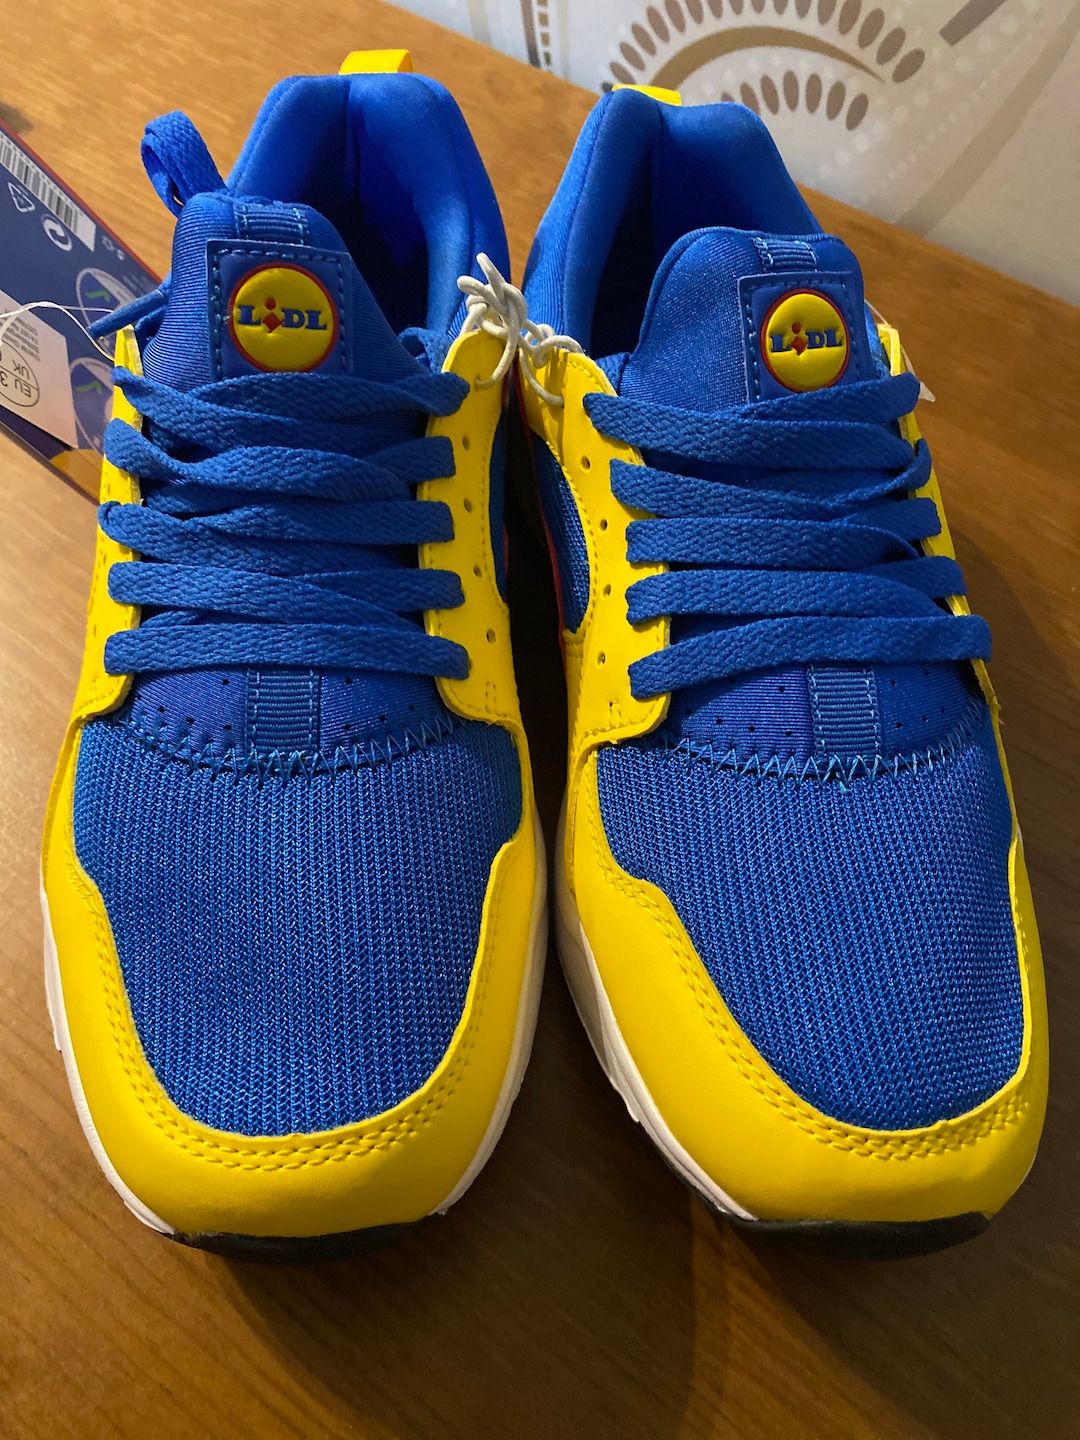 Shoes Sneakers Shoes Lidl n.41 New With Tag Limited Edition 2020